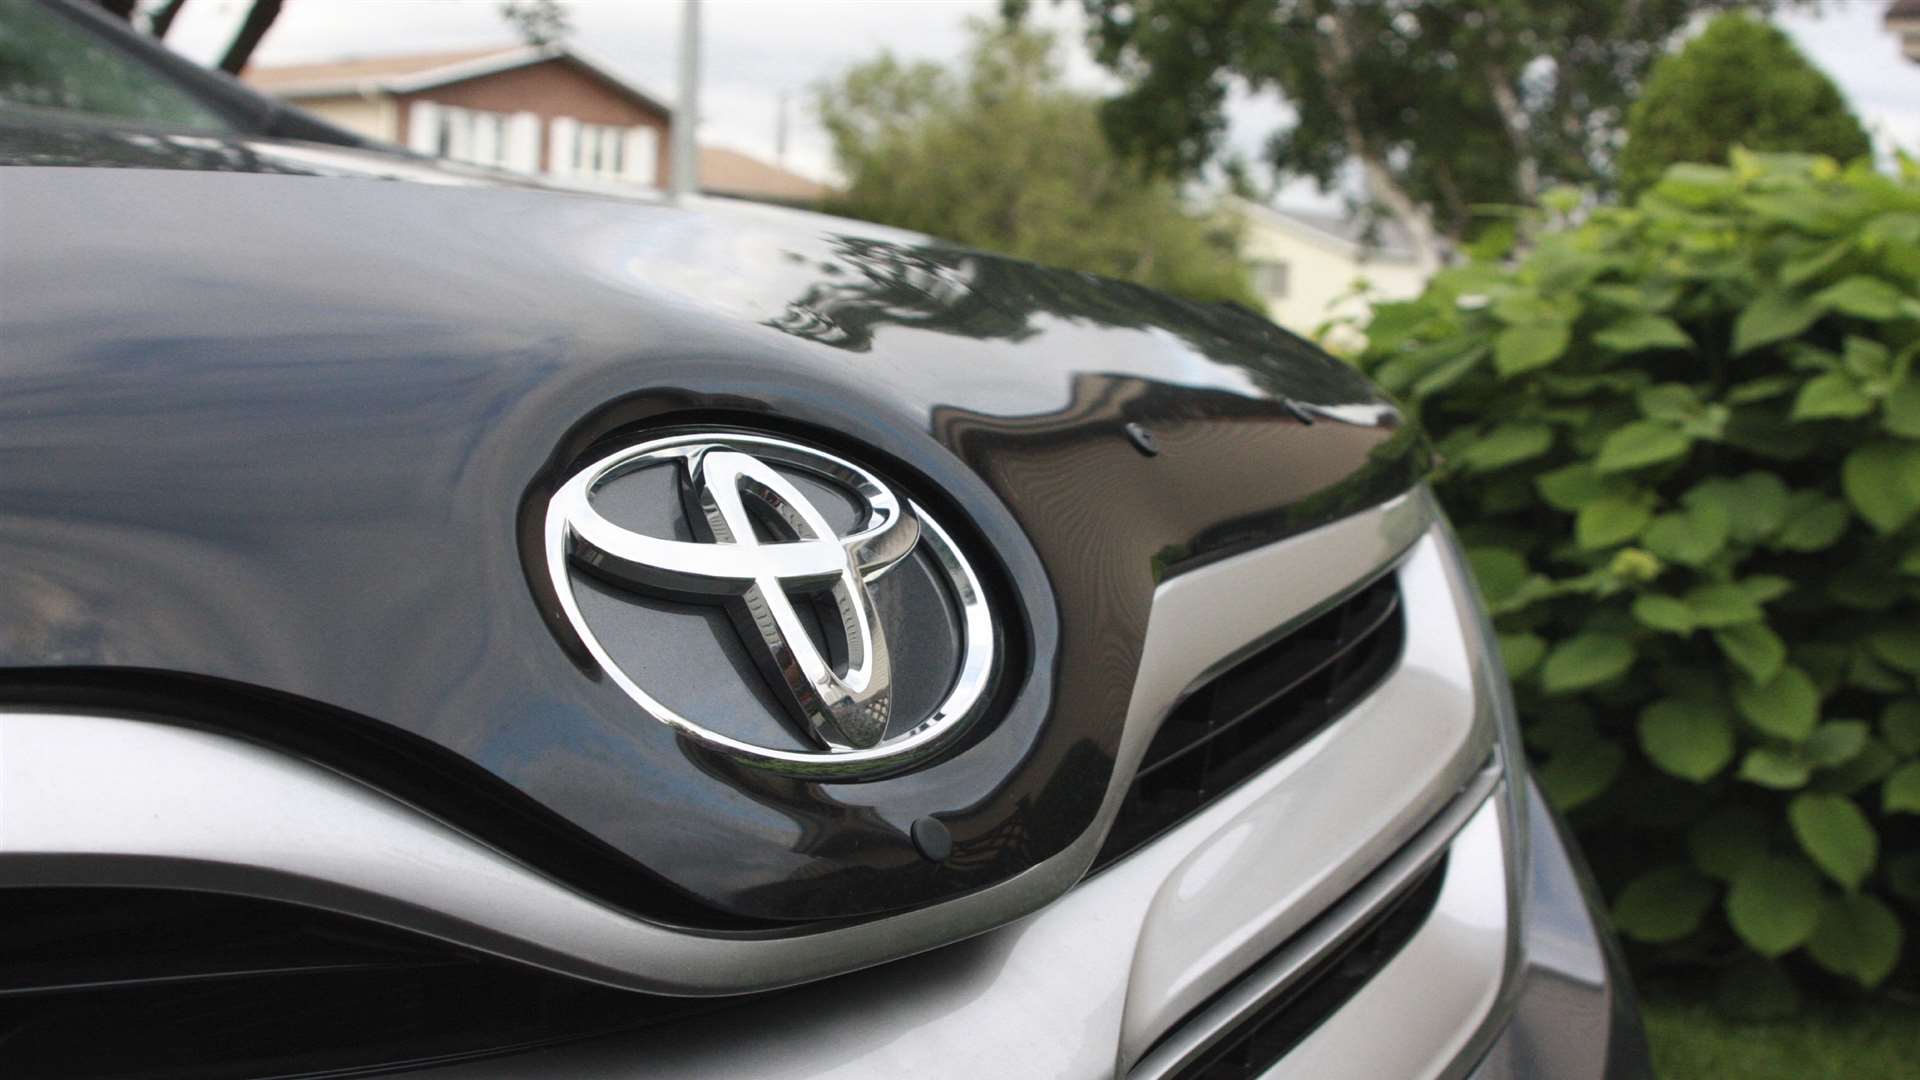 Members of the public will be able to hire out the Toyota Aygos from Tuesday